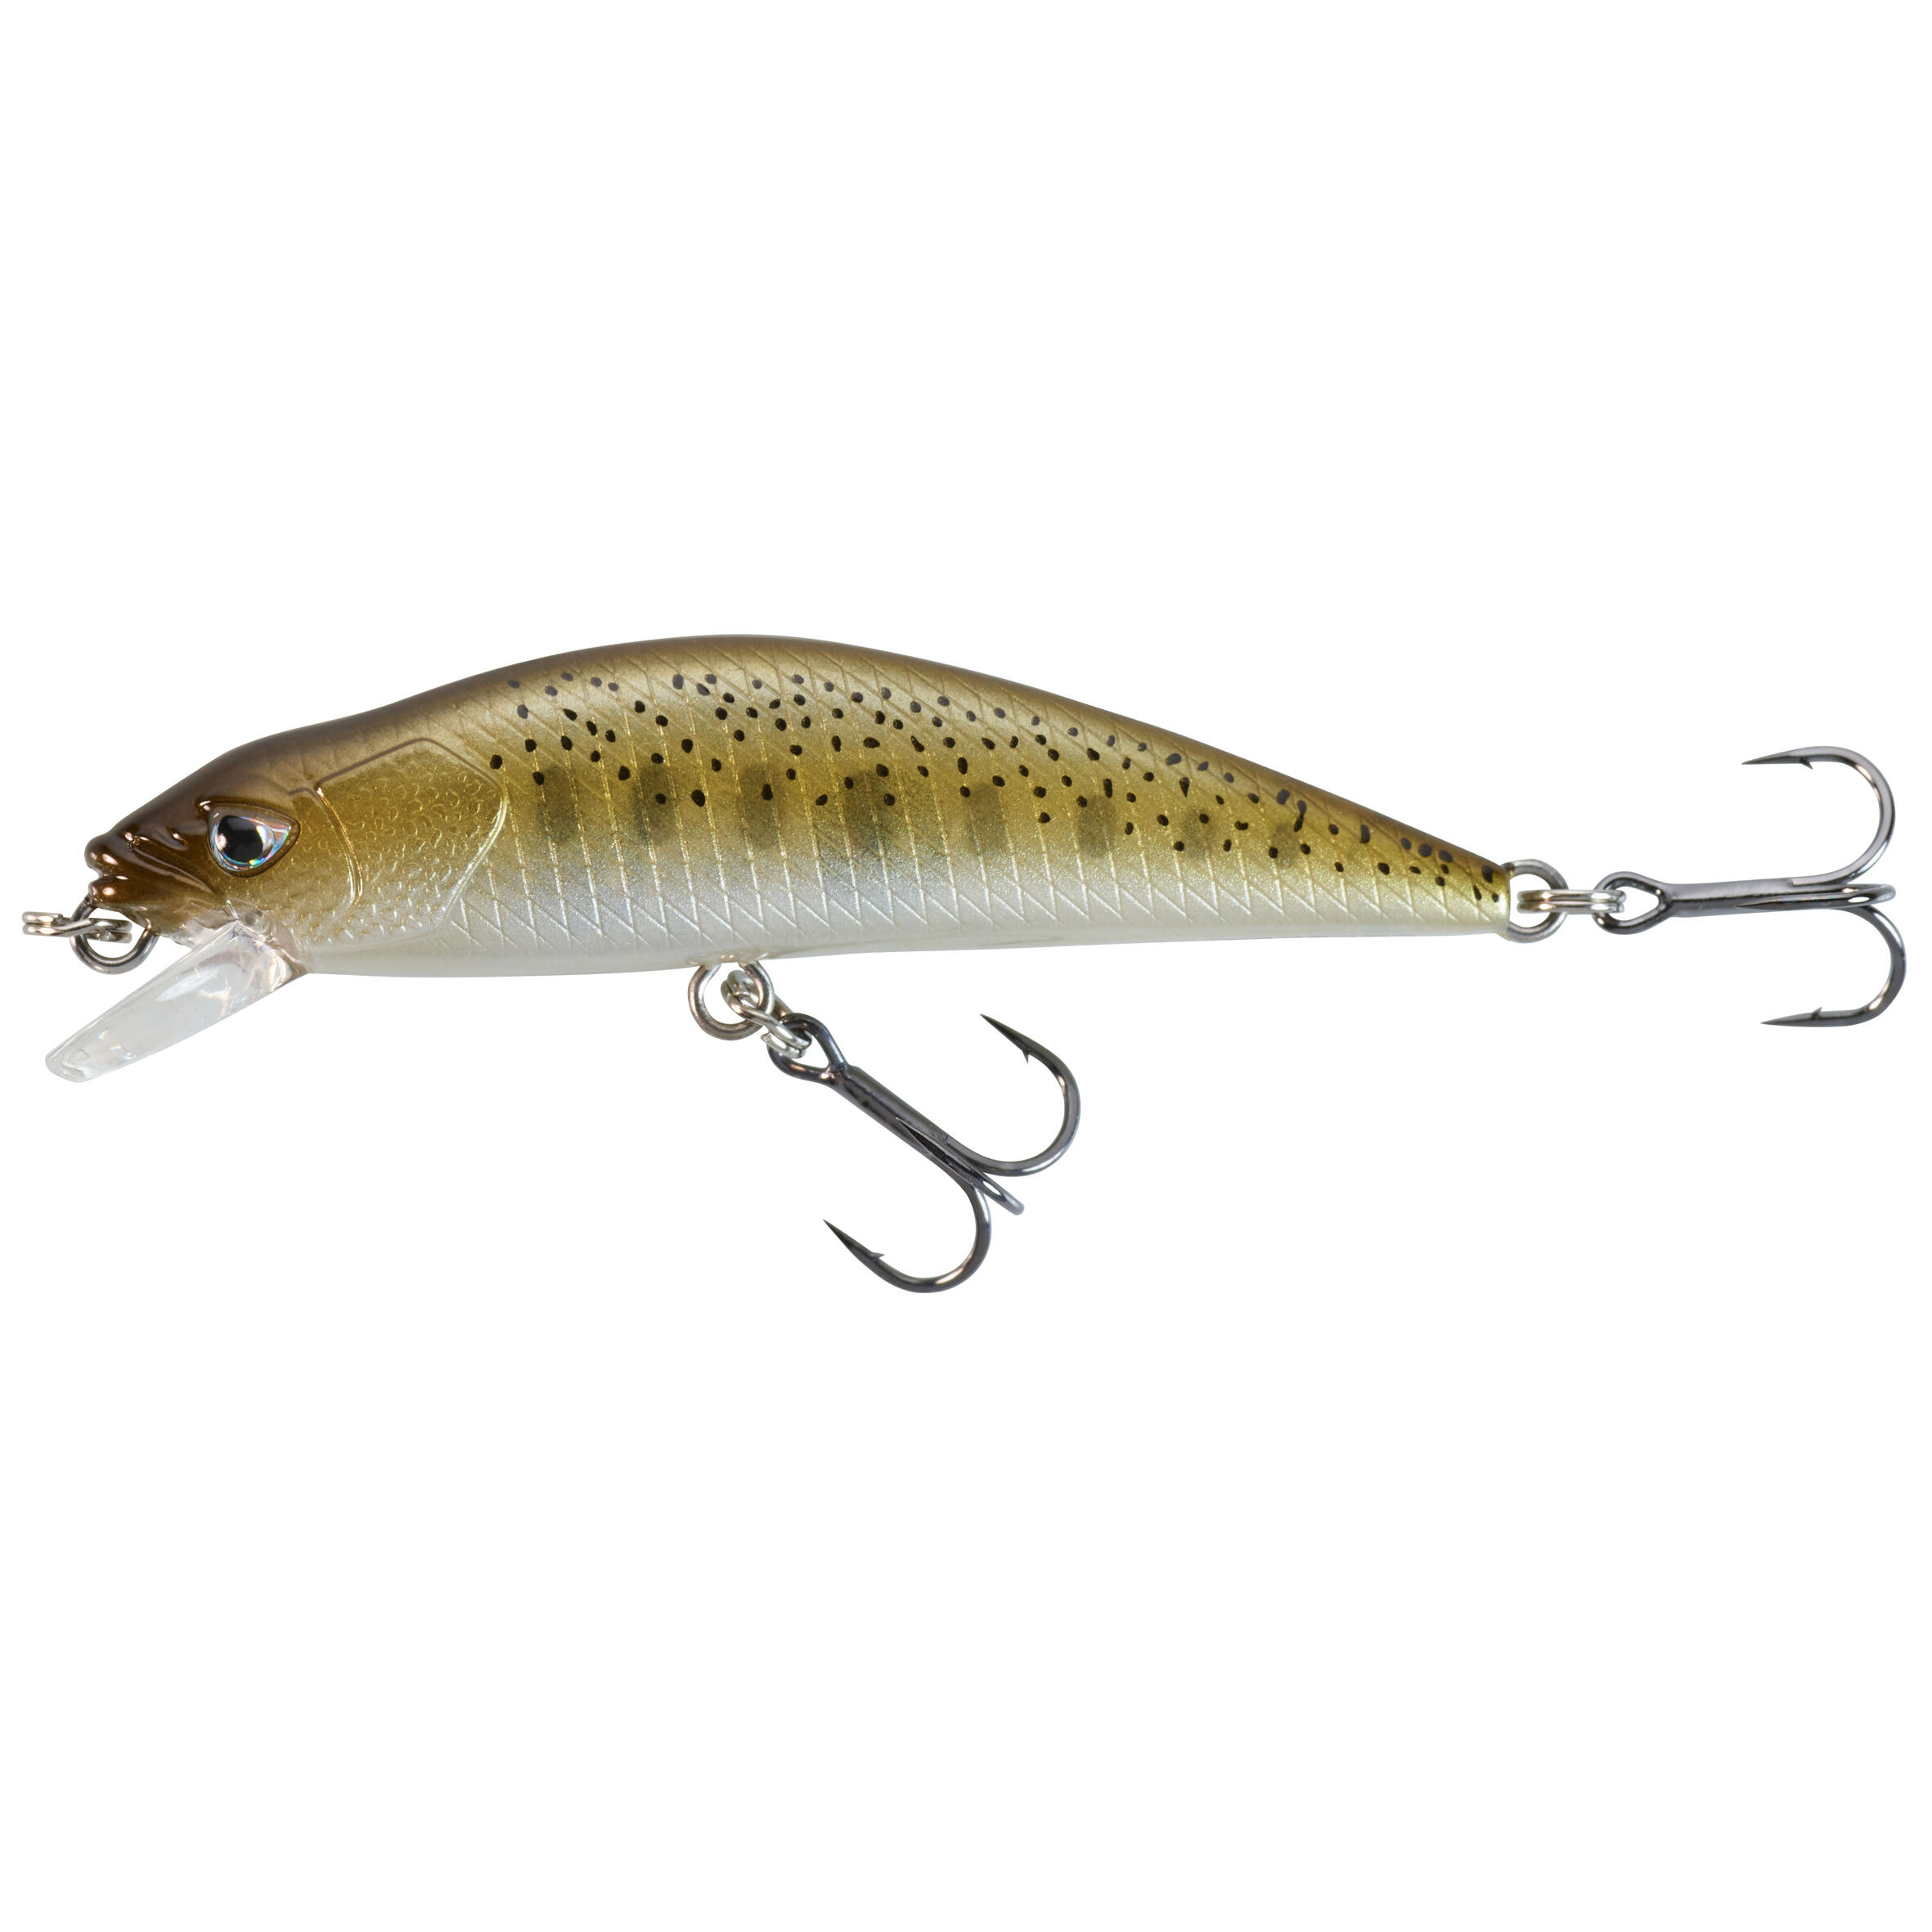 MINNOW HARD LURE FOR TROUT WXM  MNWFS 65 US YAMAME - BROWN 1/4